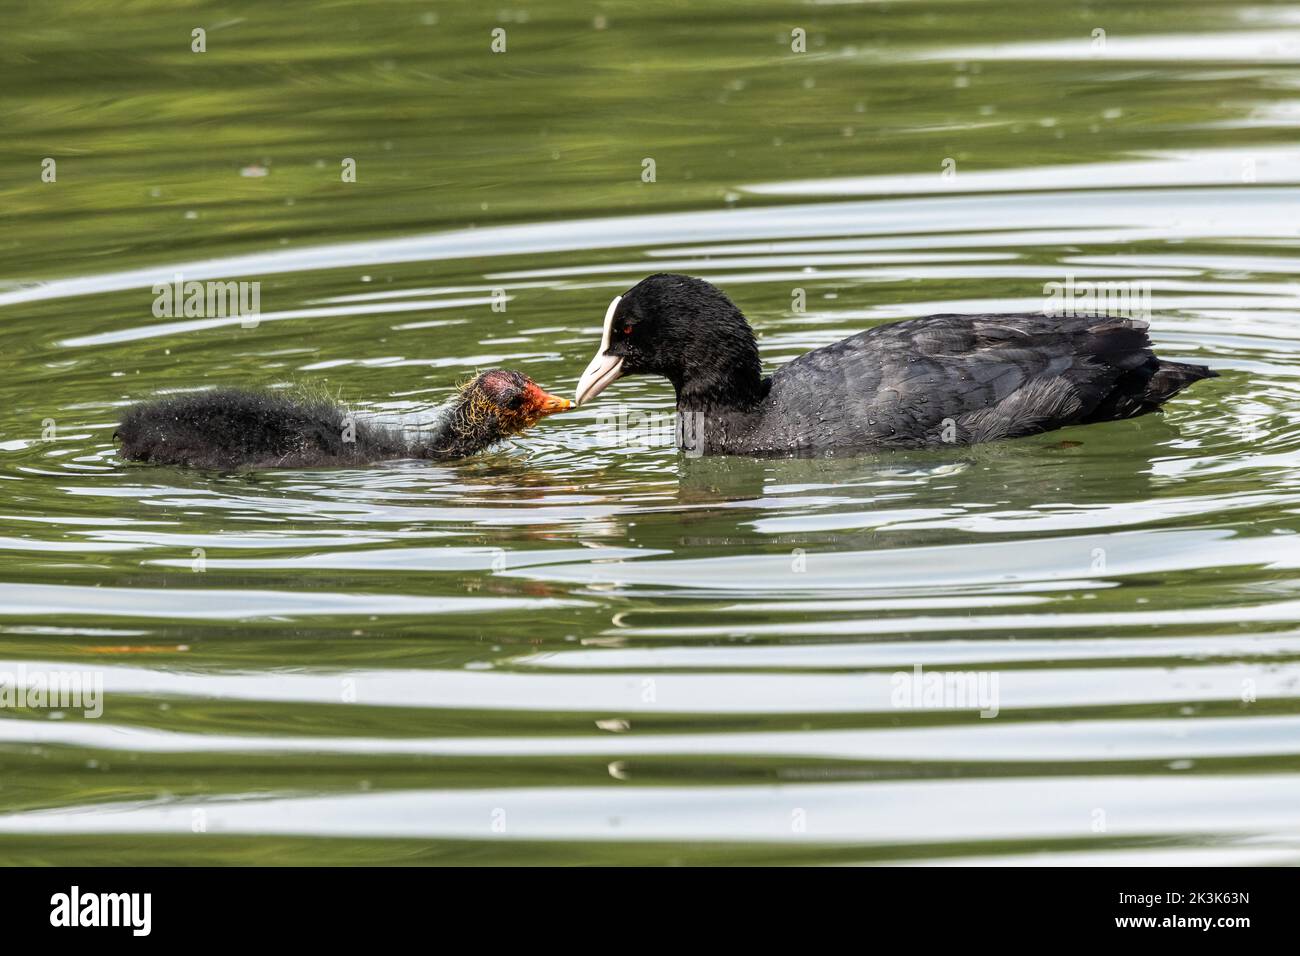 The Eurasian coot, Fulica atra, also known as the common coot, or Australian coot, is a member of the bird family, the Rallidae. It is found in Europe Stock Photo